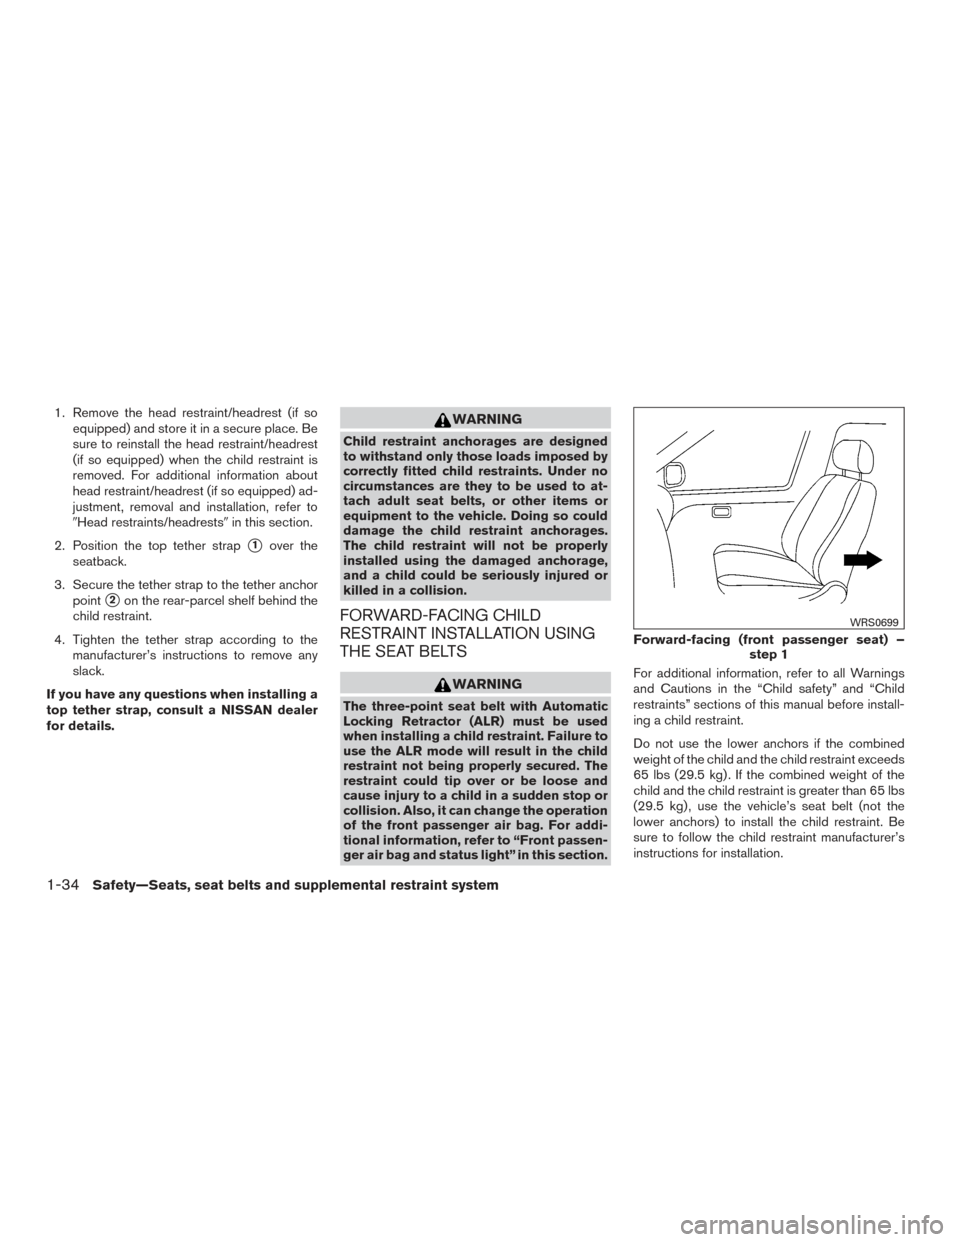 NISSAN ALTIMA 2016 L33 / 5.G Workshop Manual 1. Remove the head restraint/headrest (if soequipped) and store it in a secure place. Be
sure to reinstall the head restraint/headrest
(if so equipped) when the child restraint is
removed. For additio